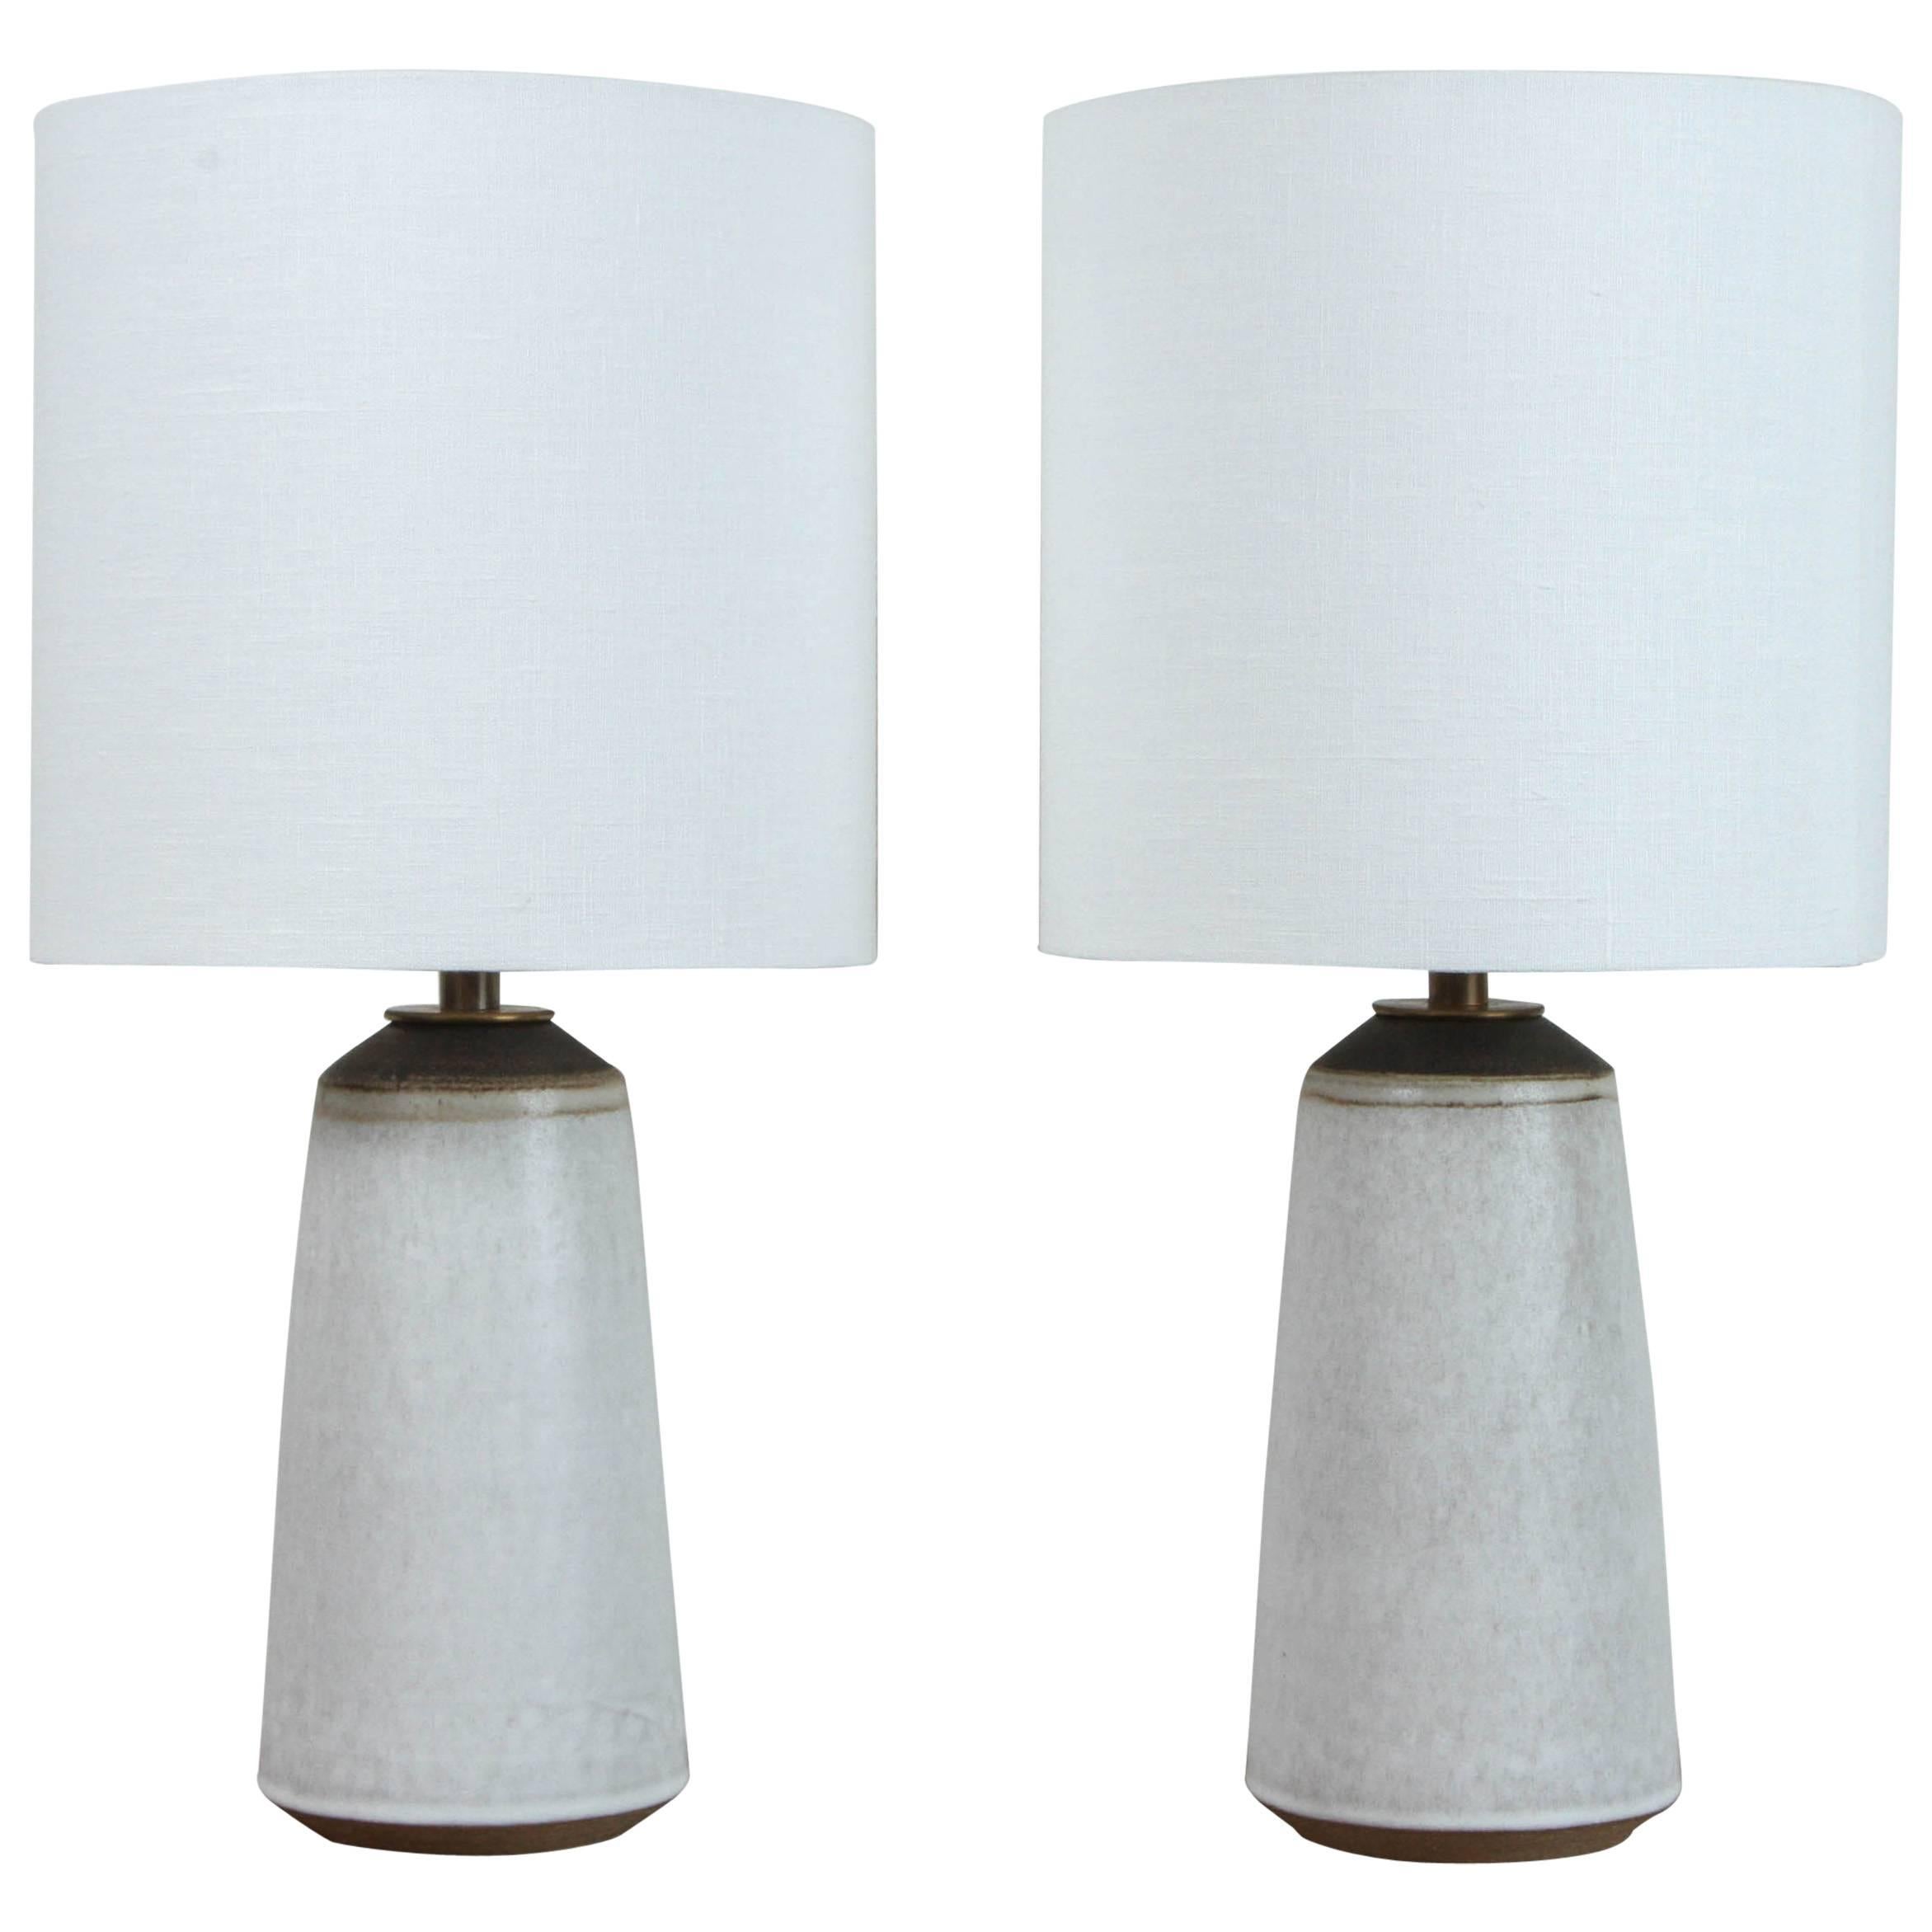 Pair of White Birch Ceramic Table Lamp by Victoria Morris